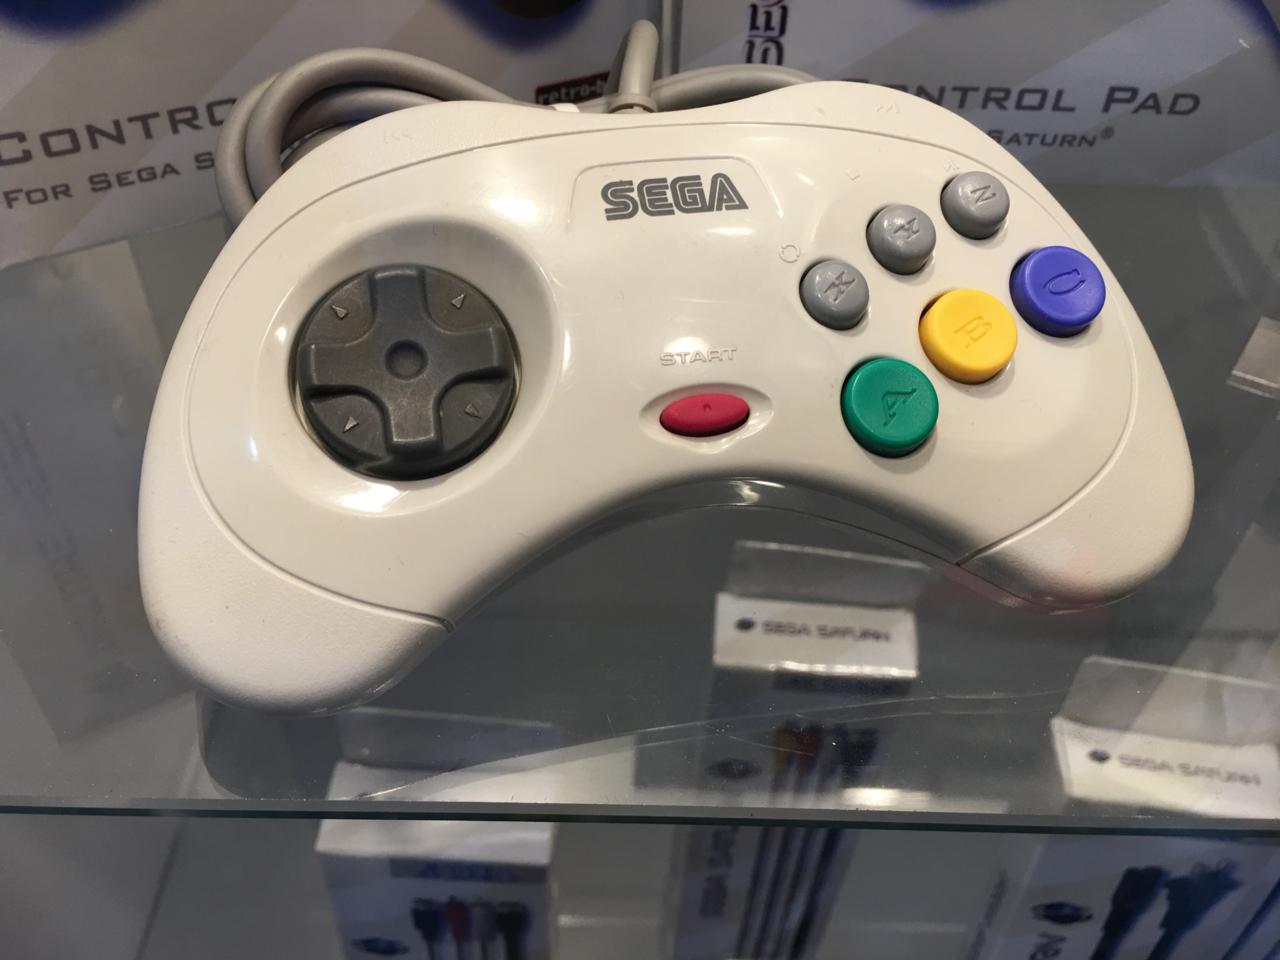 The White Saturn Controller